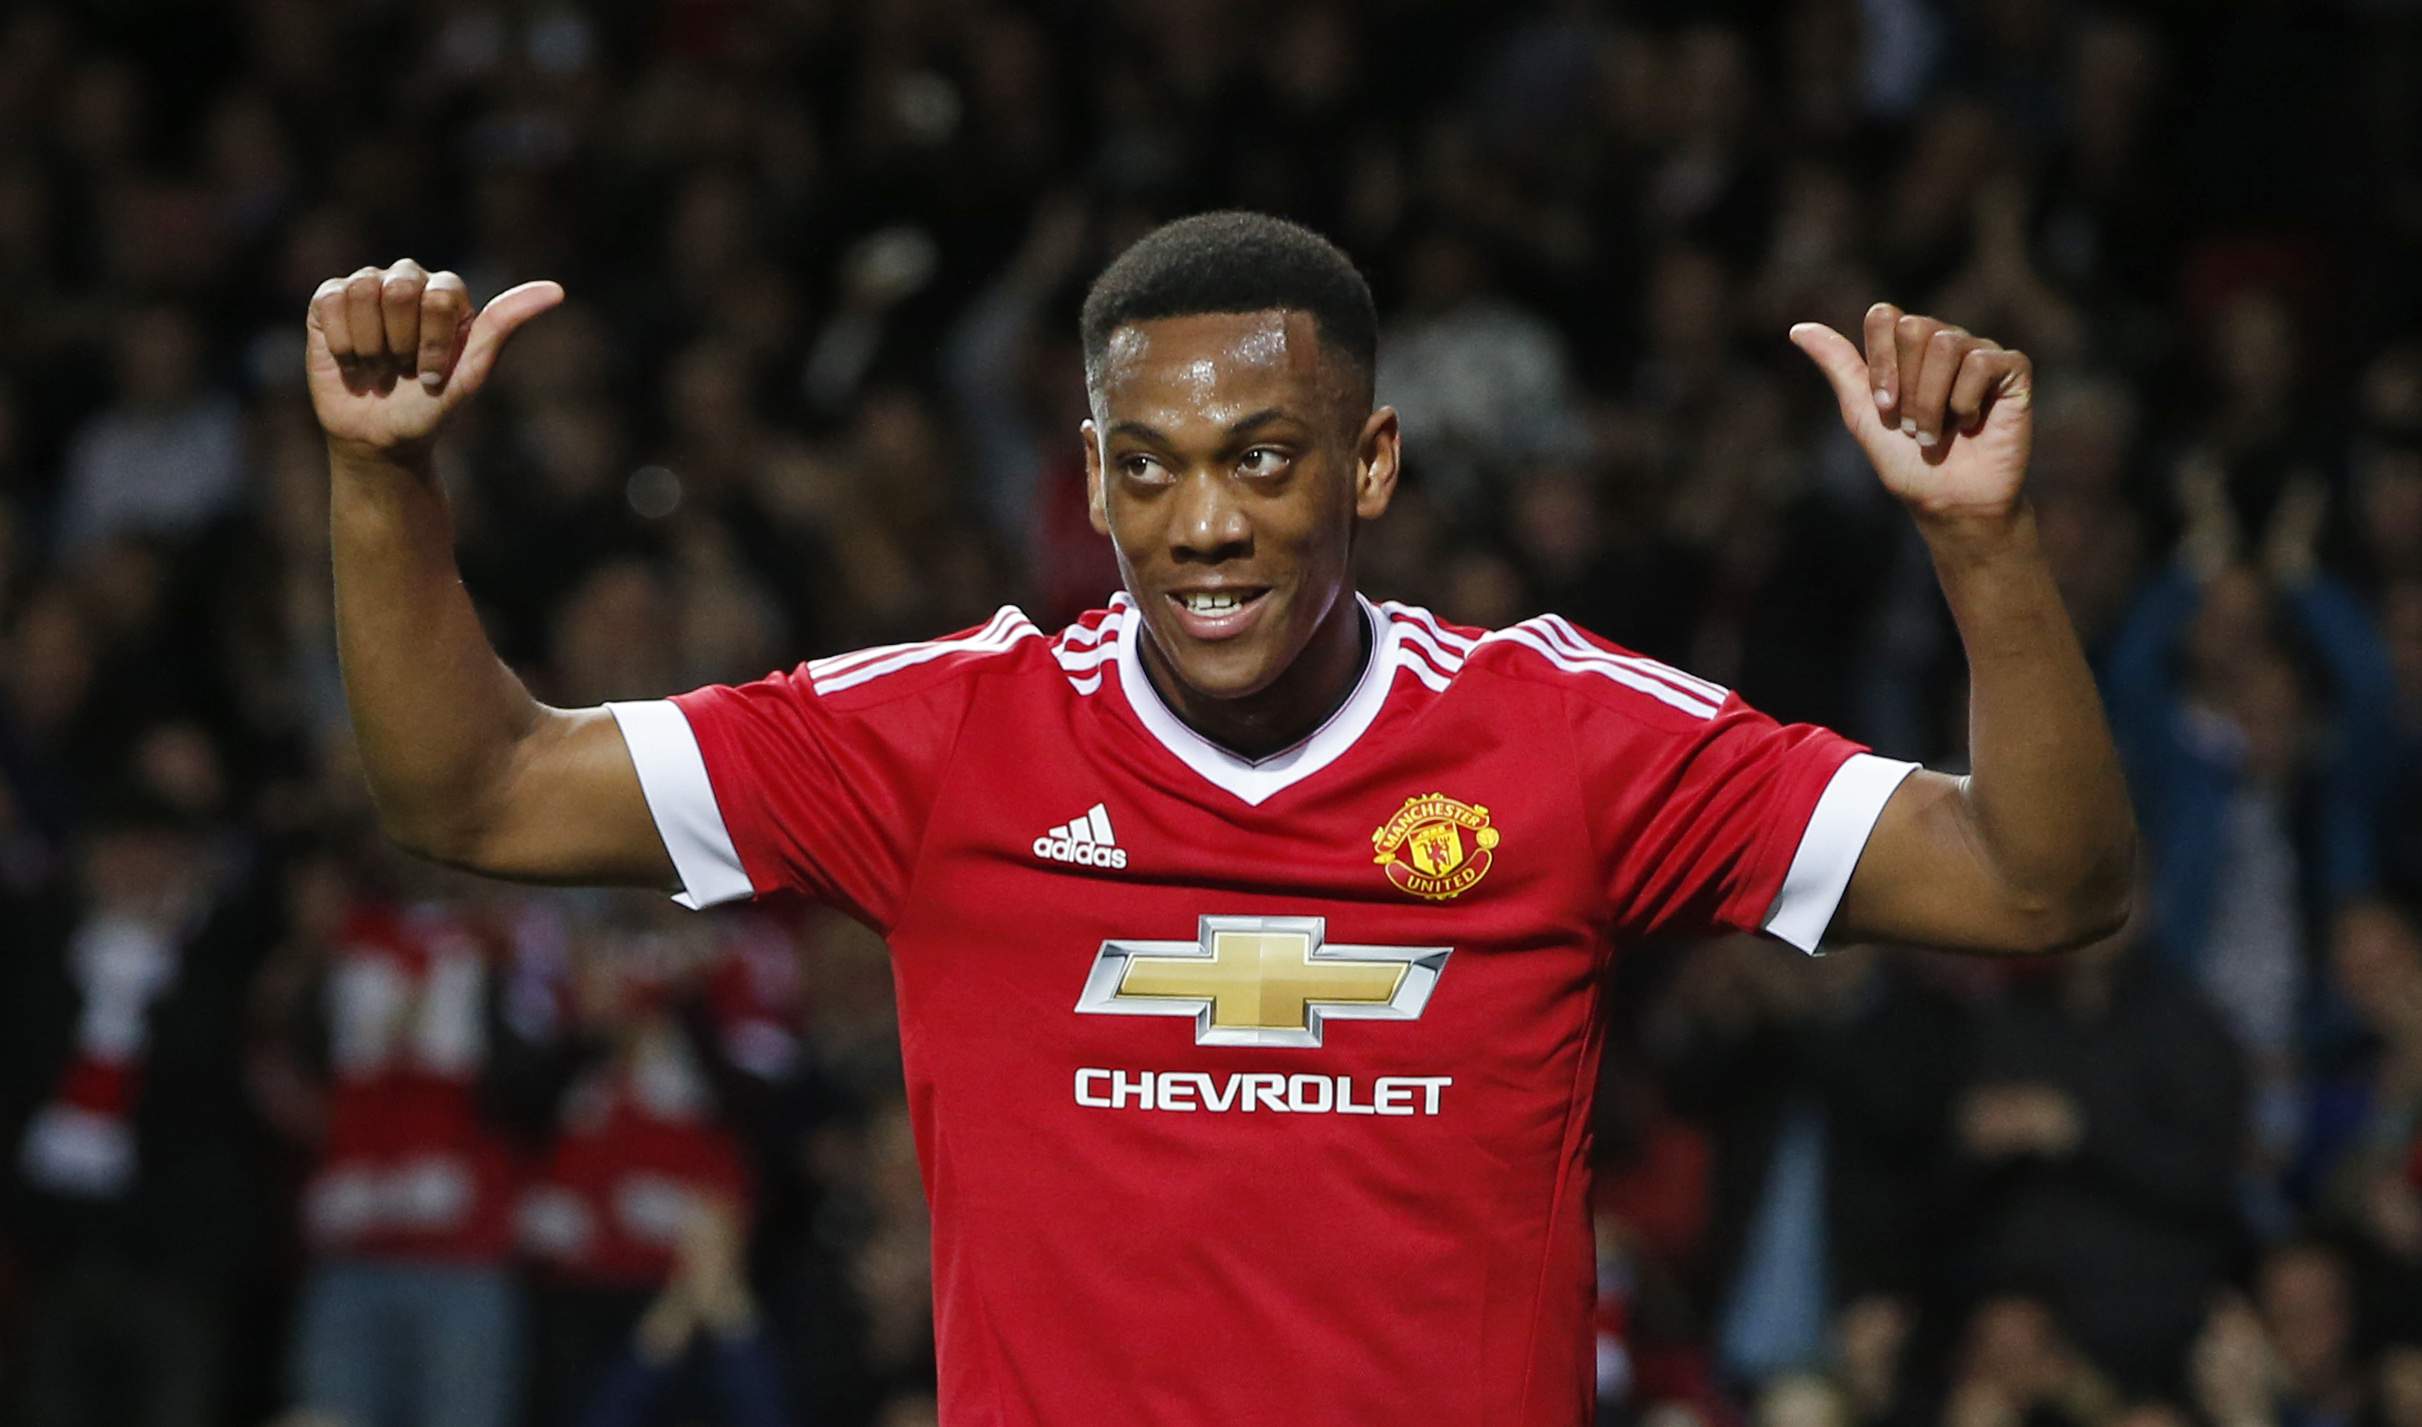 Football - Manchester United v Ipswich Town - Capital One Cup Third Round - Old Trafford - 23/9/15 Anthony Martial celebrates after scoring the third goal for Manchester United Reuters / Andrew Yates Livepic EDITORIAL USE ONLY. No use with unauthorized audio, video, data, fixture lists, club/league logos or "live" services. Online in-match use limited to 45 images, no video emulation. No use in betting, games or single club/league/player publications.  Please contact your account representative for further details.